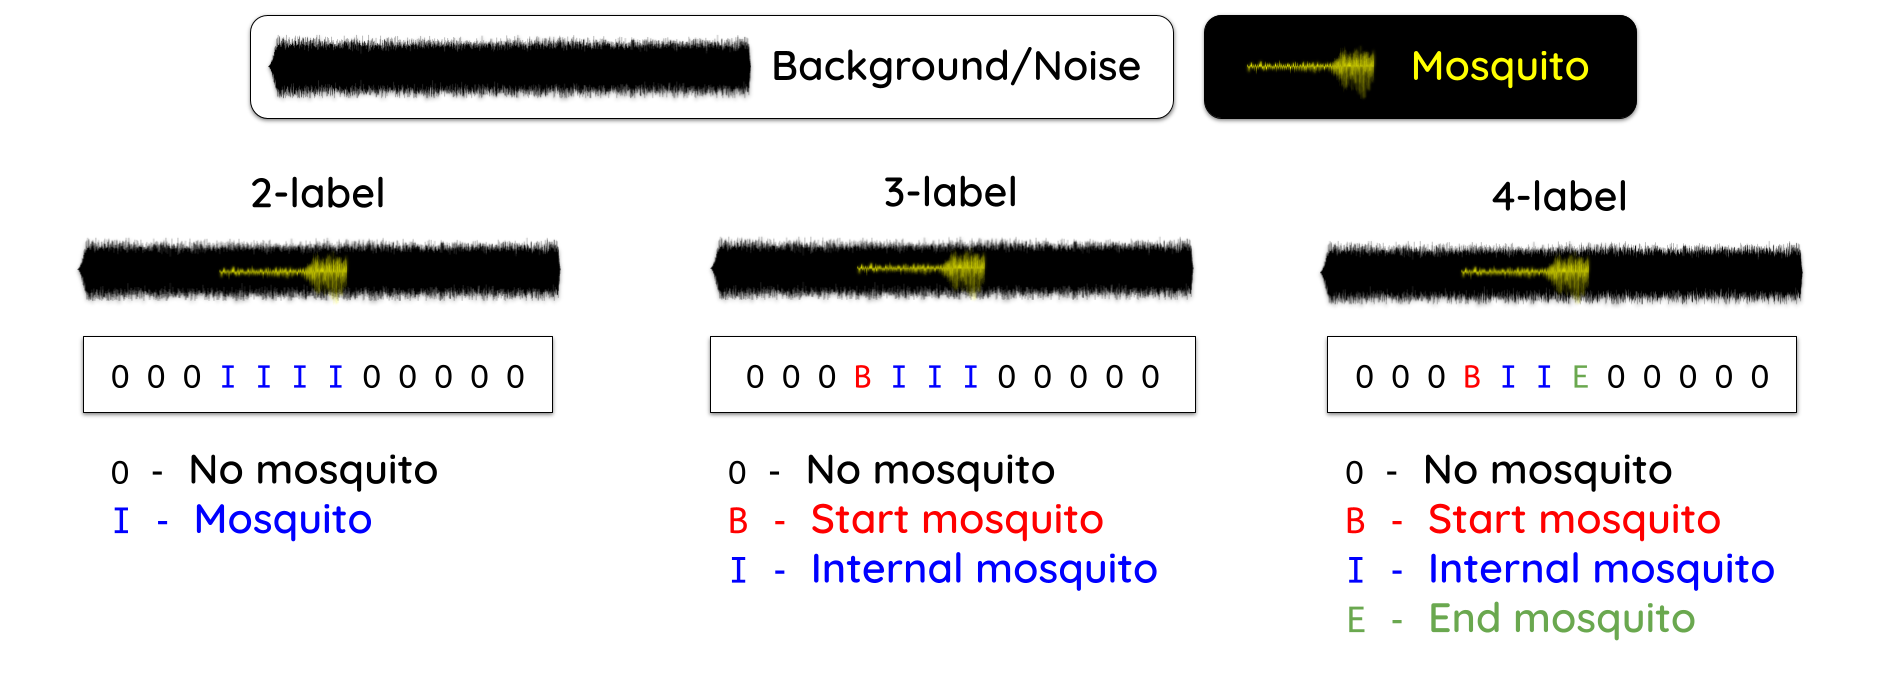 Sequence labeling schemes